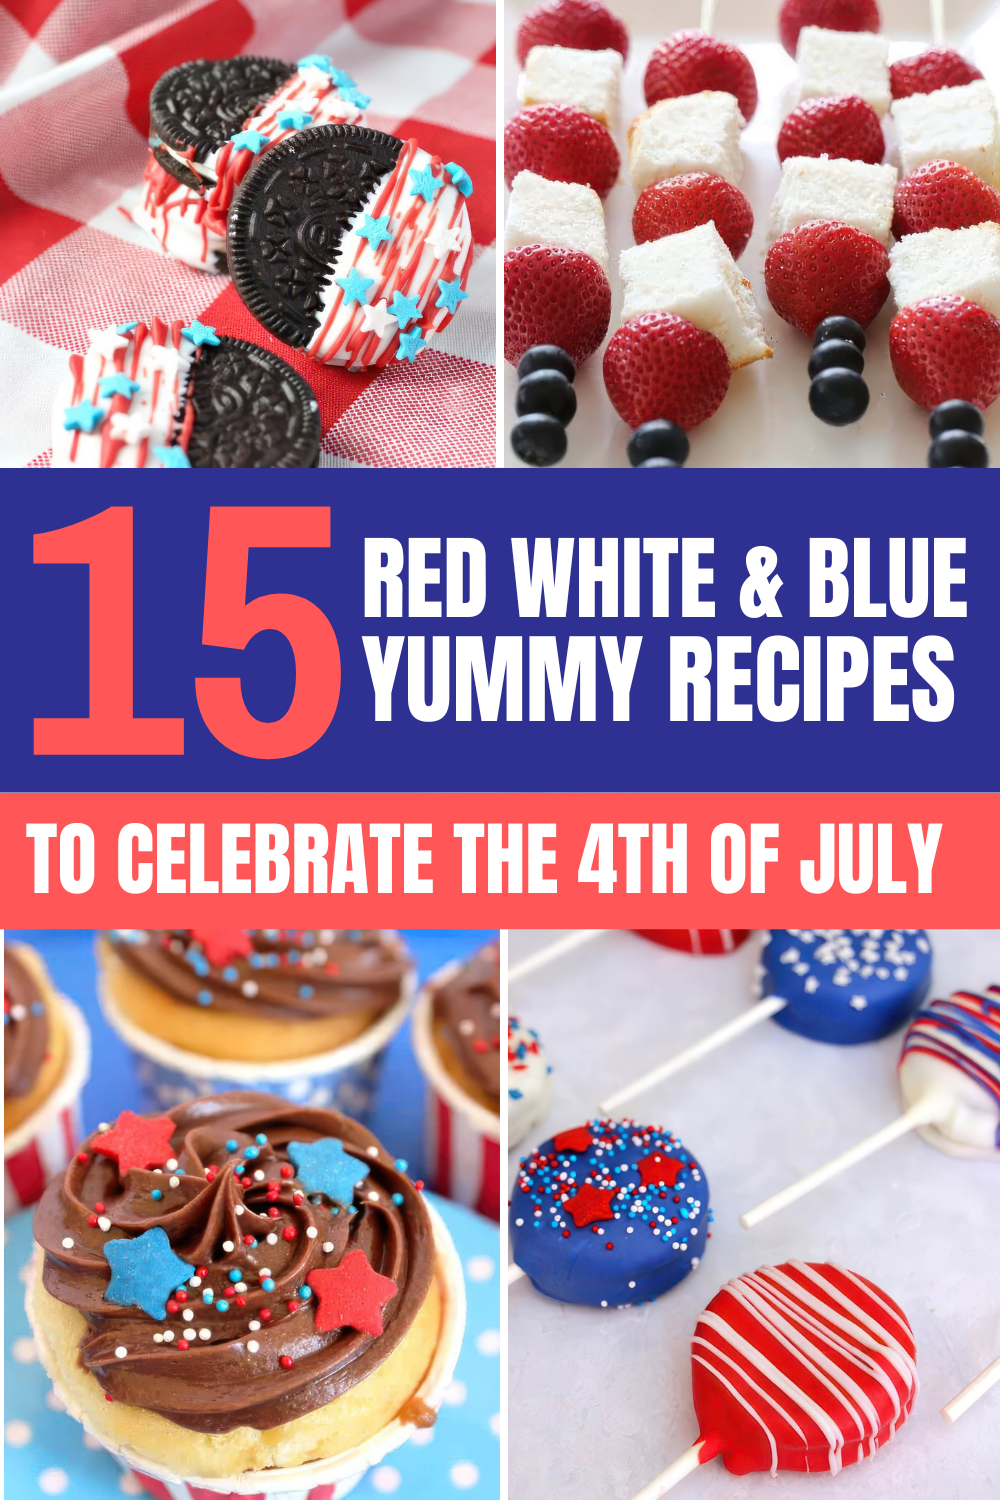 Add some patriotic flair to your holiday with these fun and easy recipes! Perfect for kids, these red, white, and blue dishes are sure to be a hit. Click to check out all the festive foods! 🍉🍧🎉

